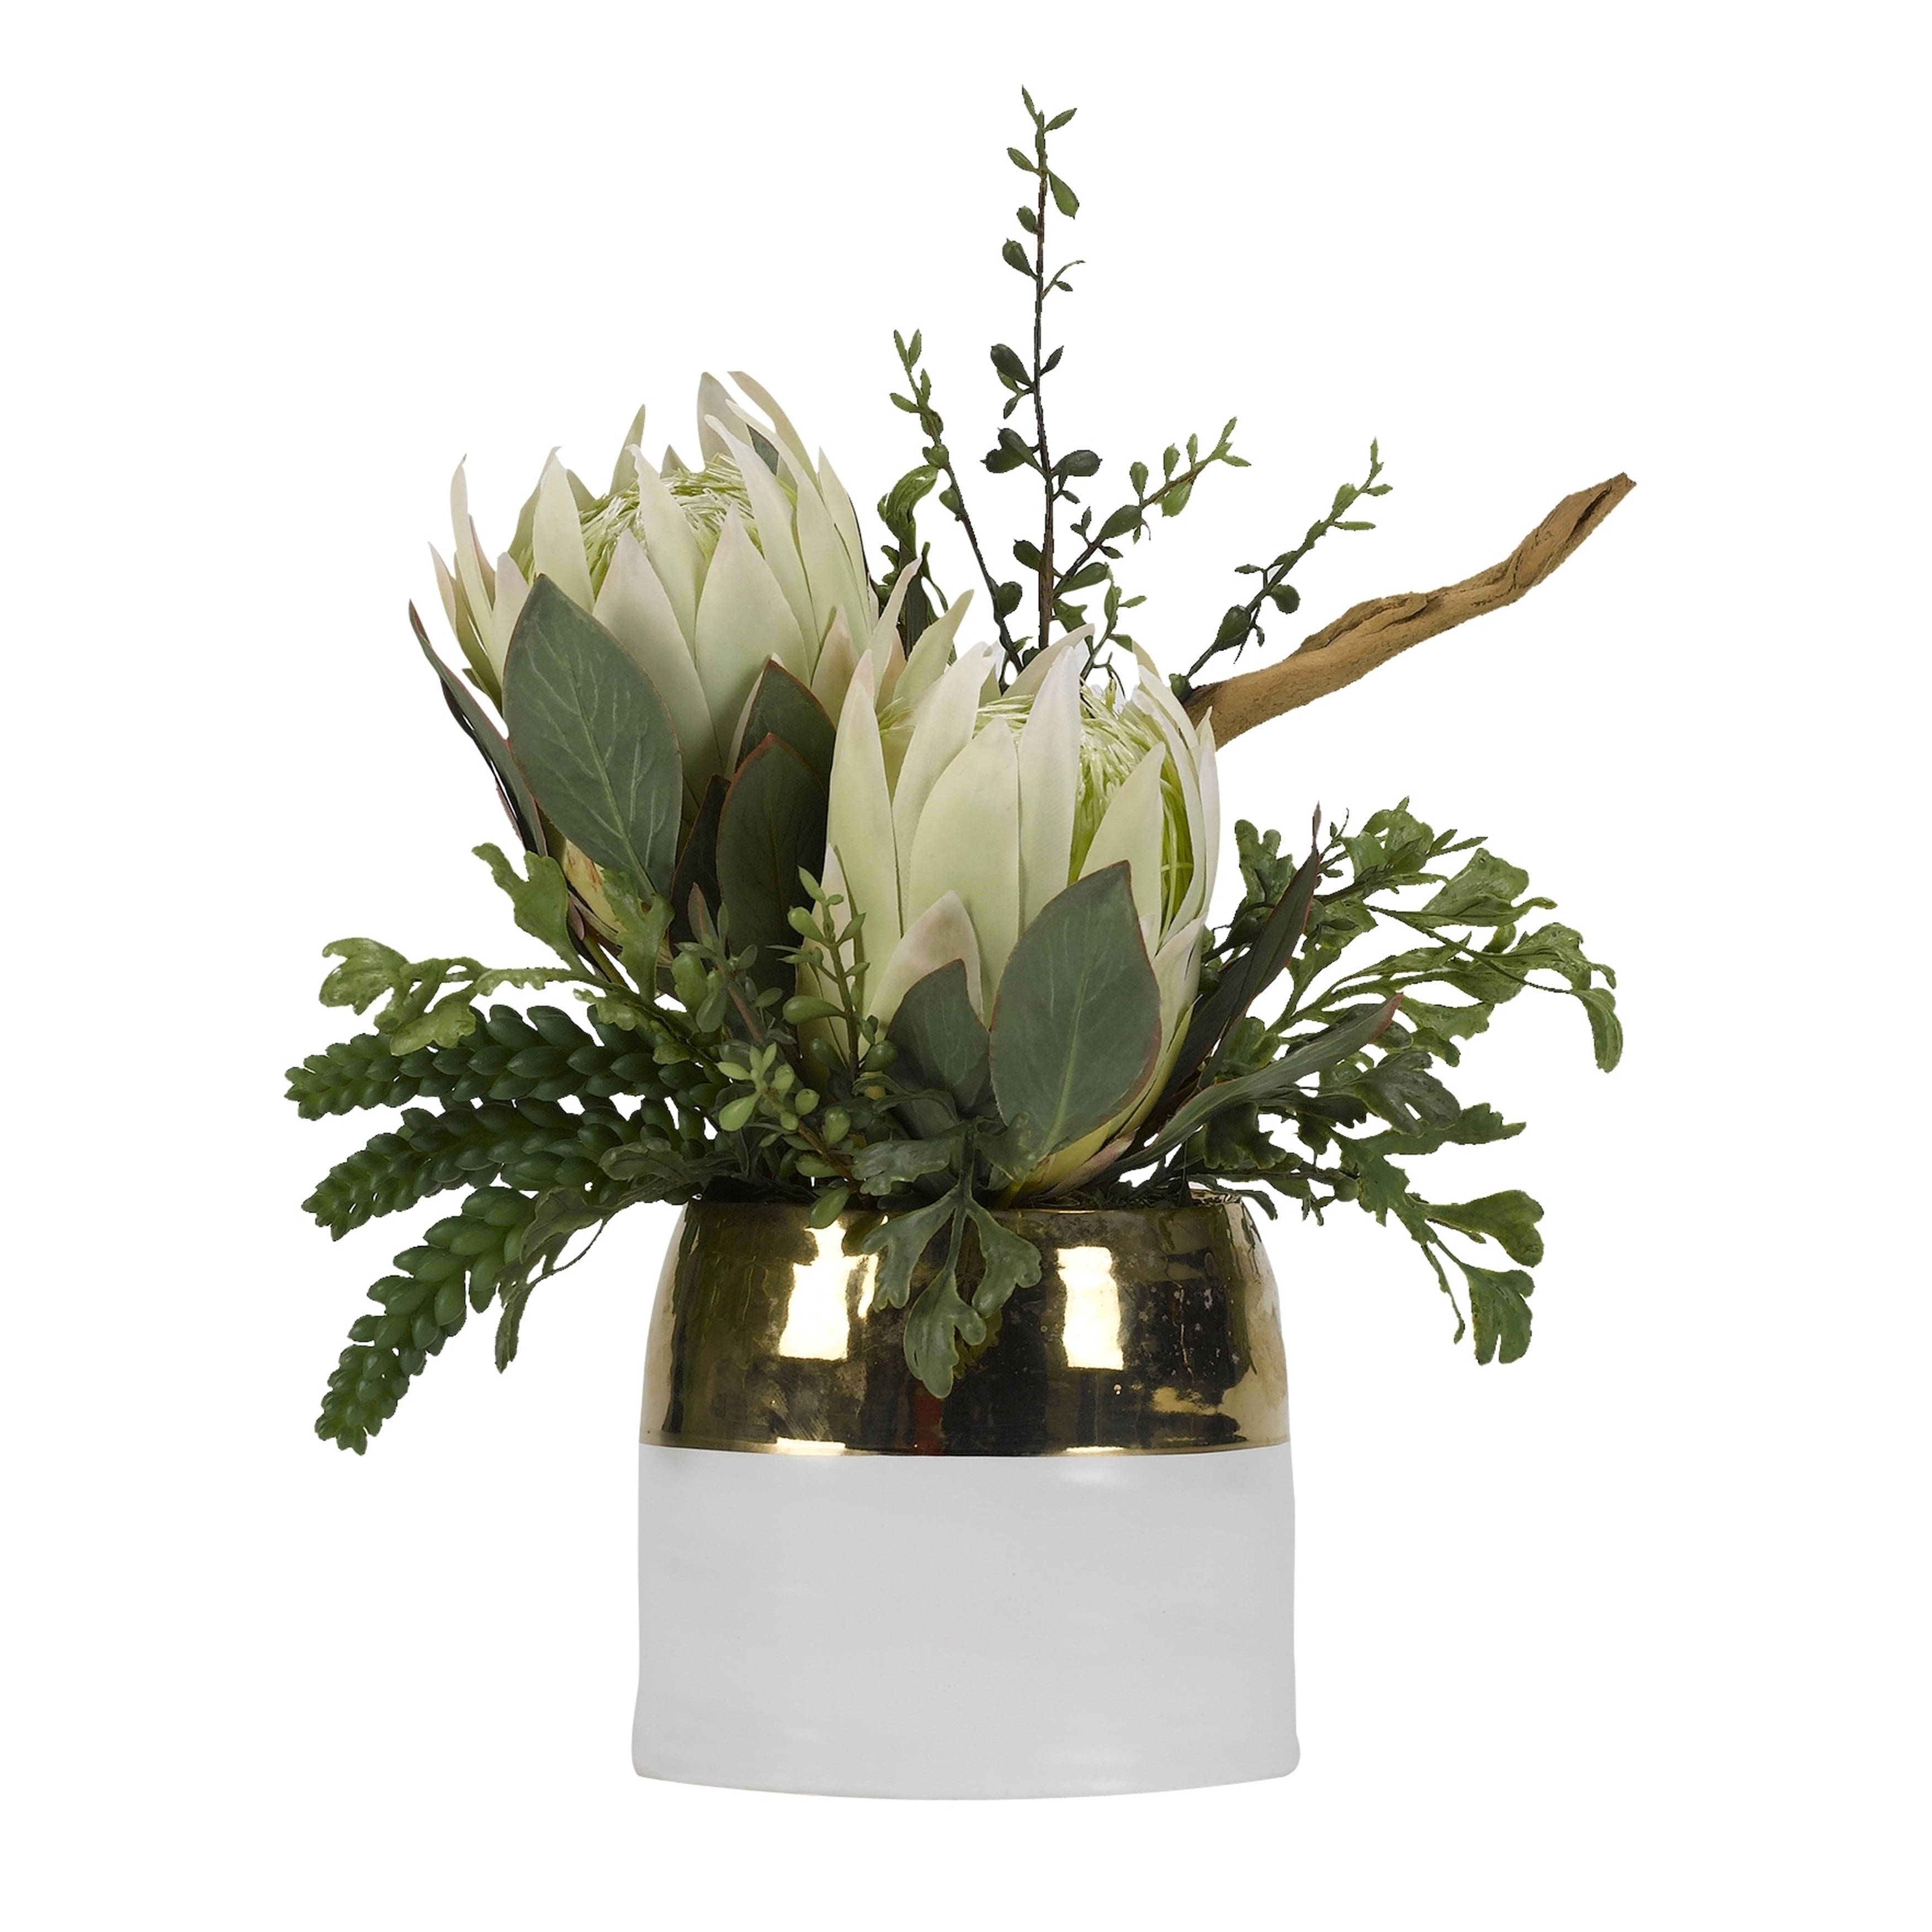 D&W Silks Large Green King Proteas with Hare's Foot Fern in Oval Cream and Gold Ceramic